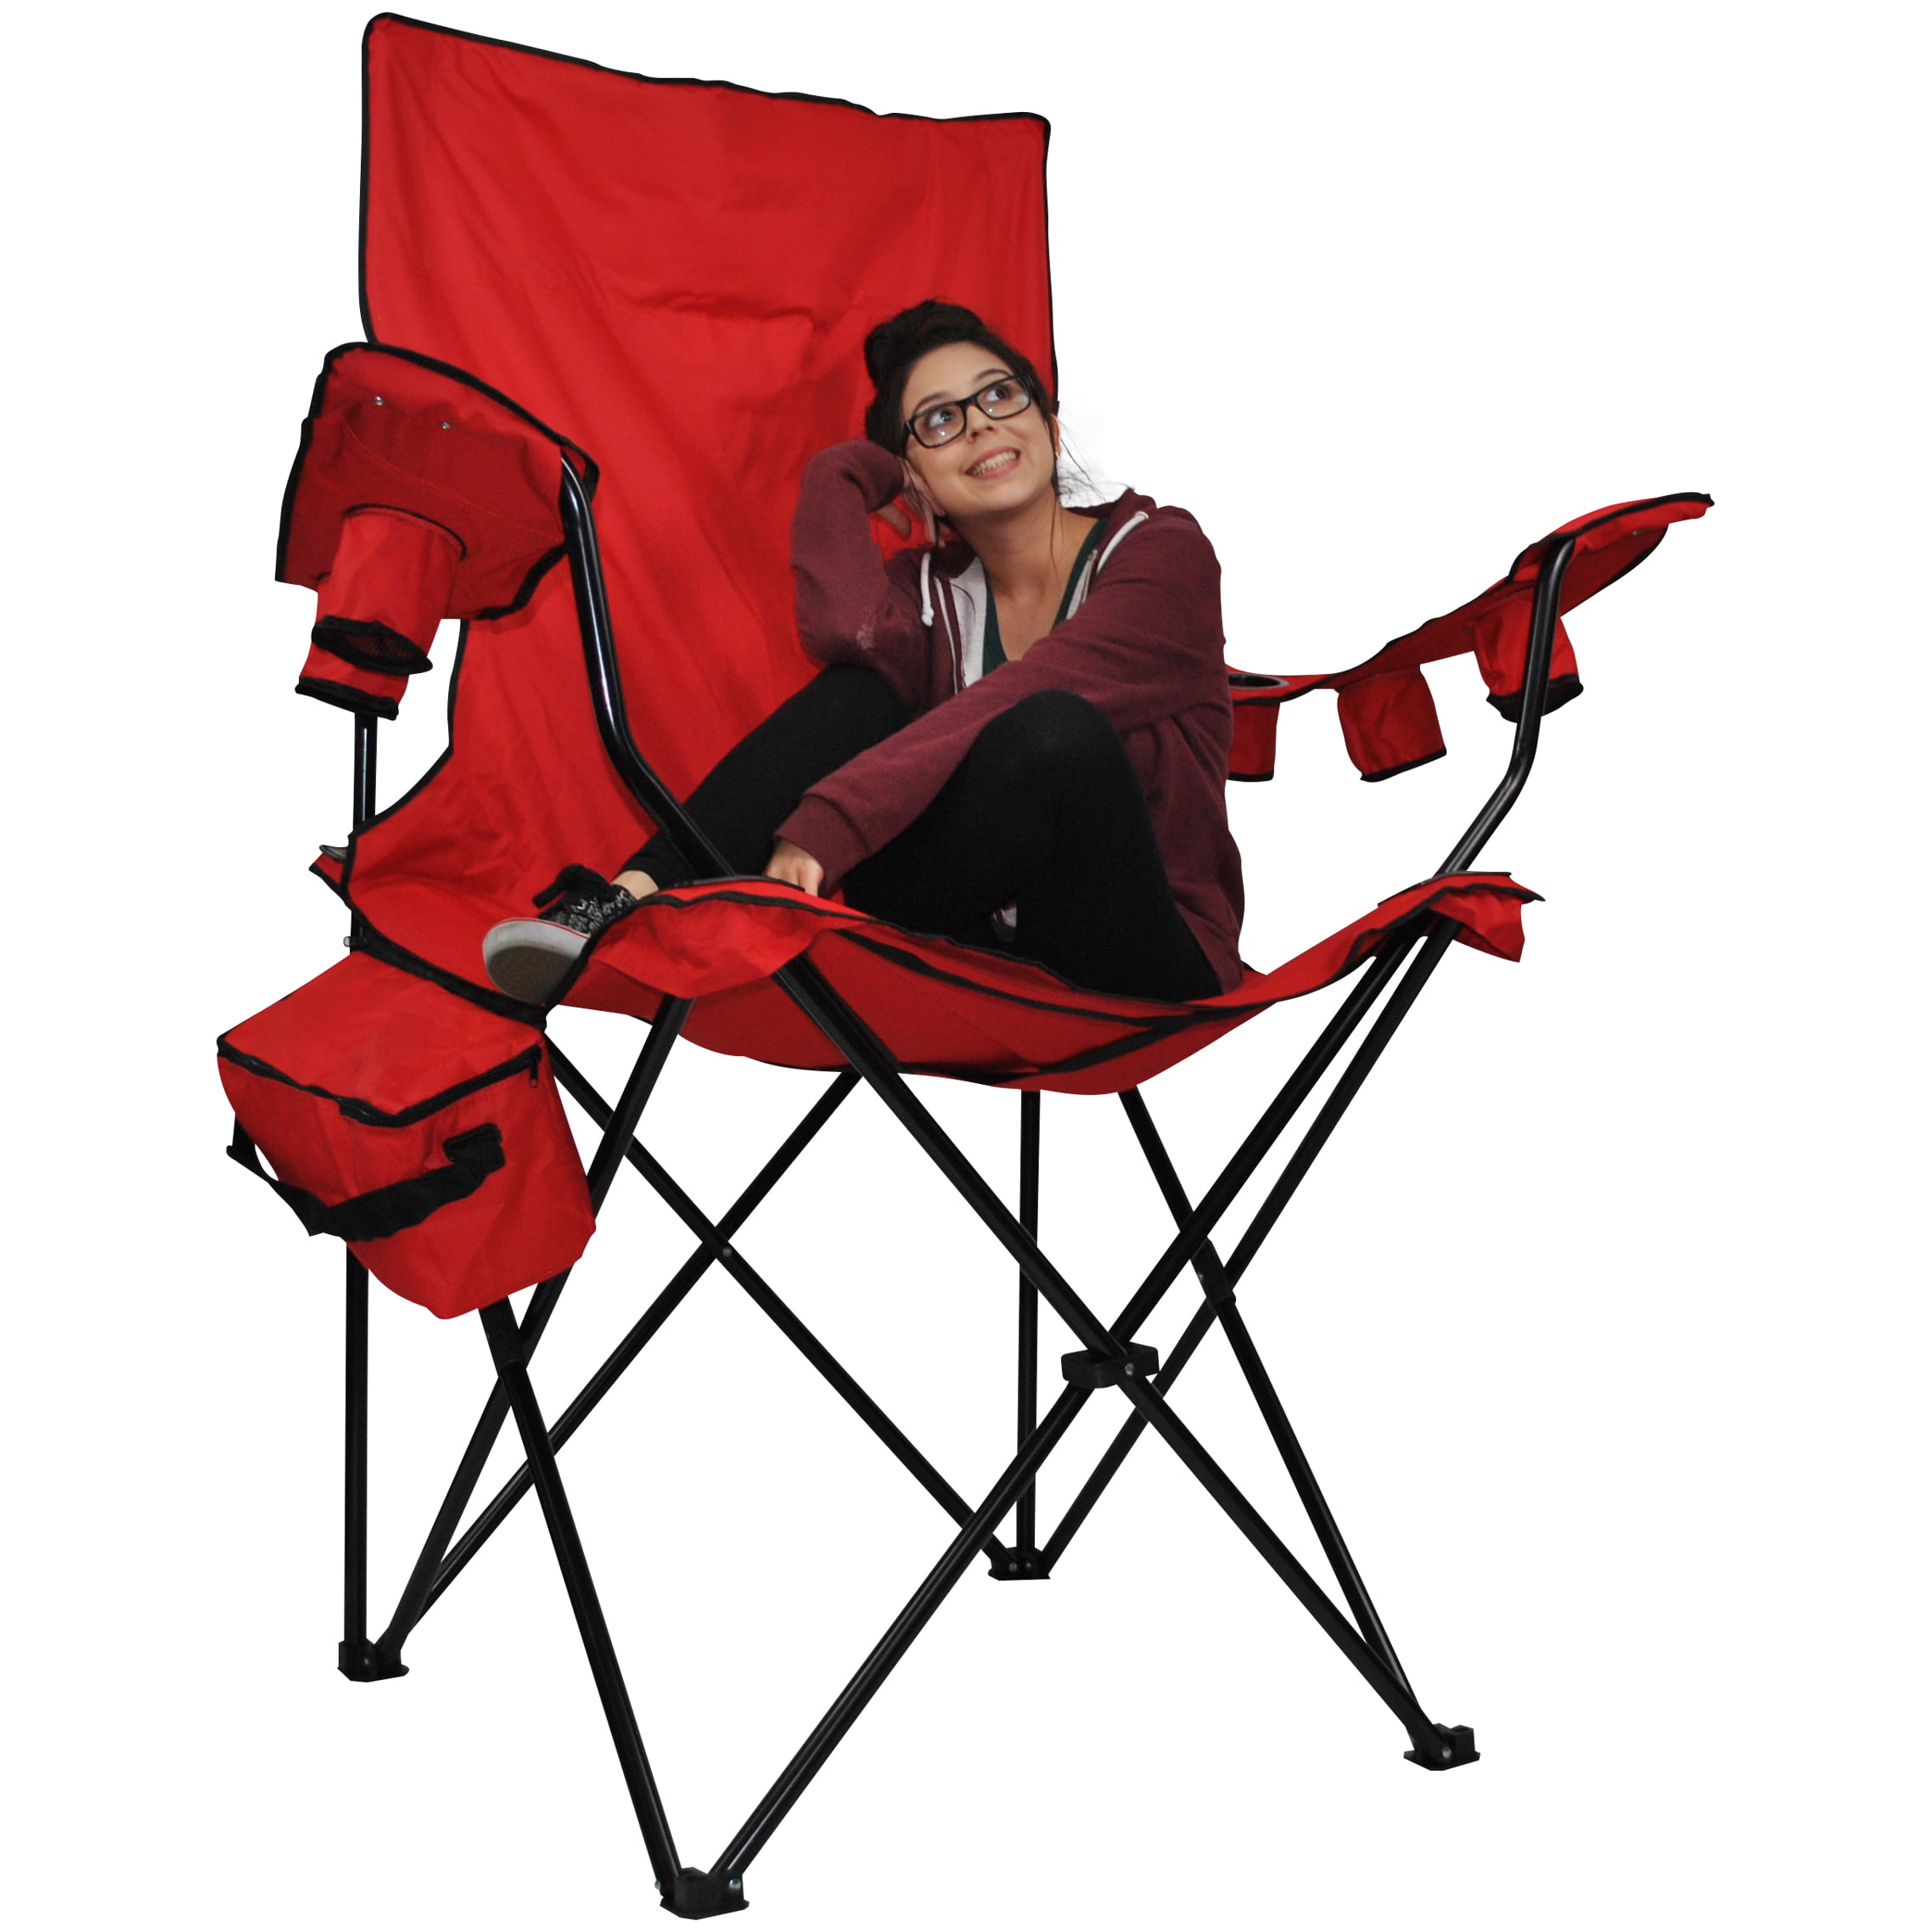 Giant Kingpin Folding Chair Chair Red With 6 Cup Holders